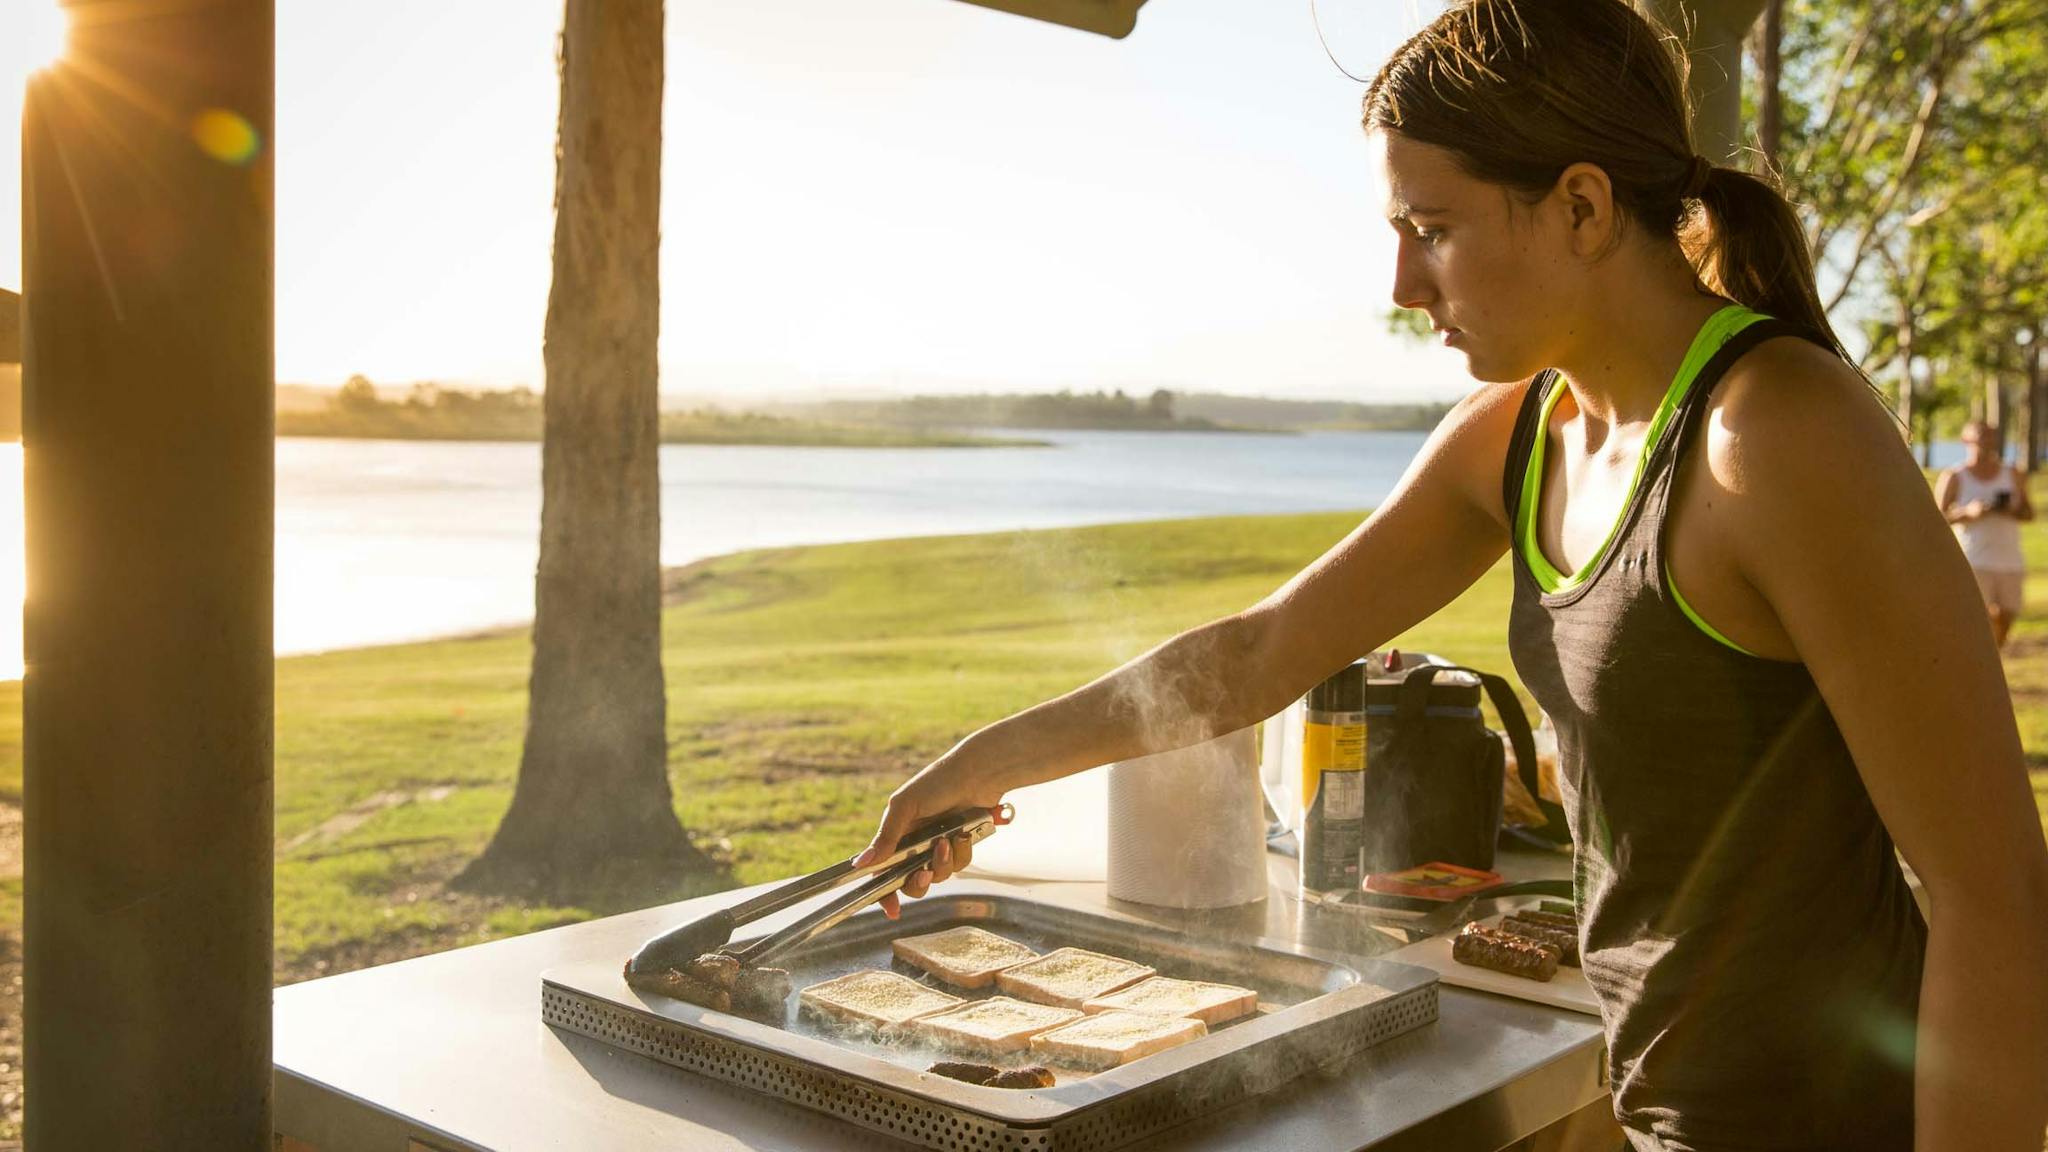 Woman flipping sausages with tongs on a barbecue under picnic shelter looking over grass and lake